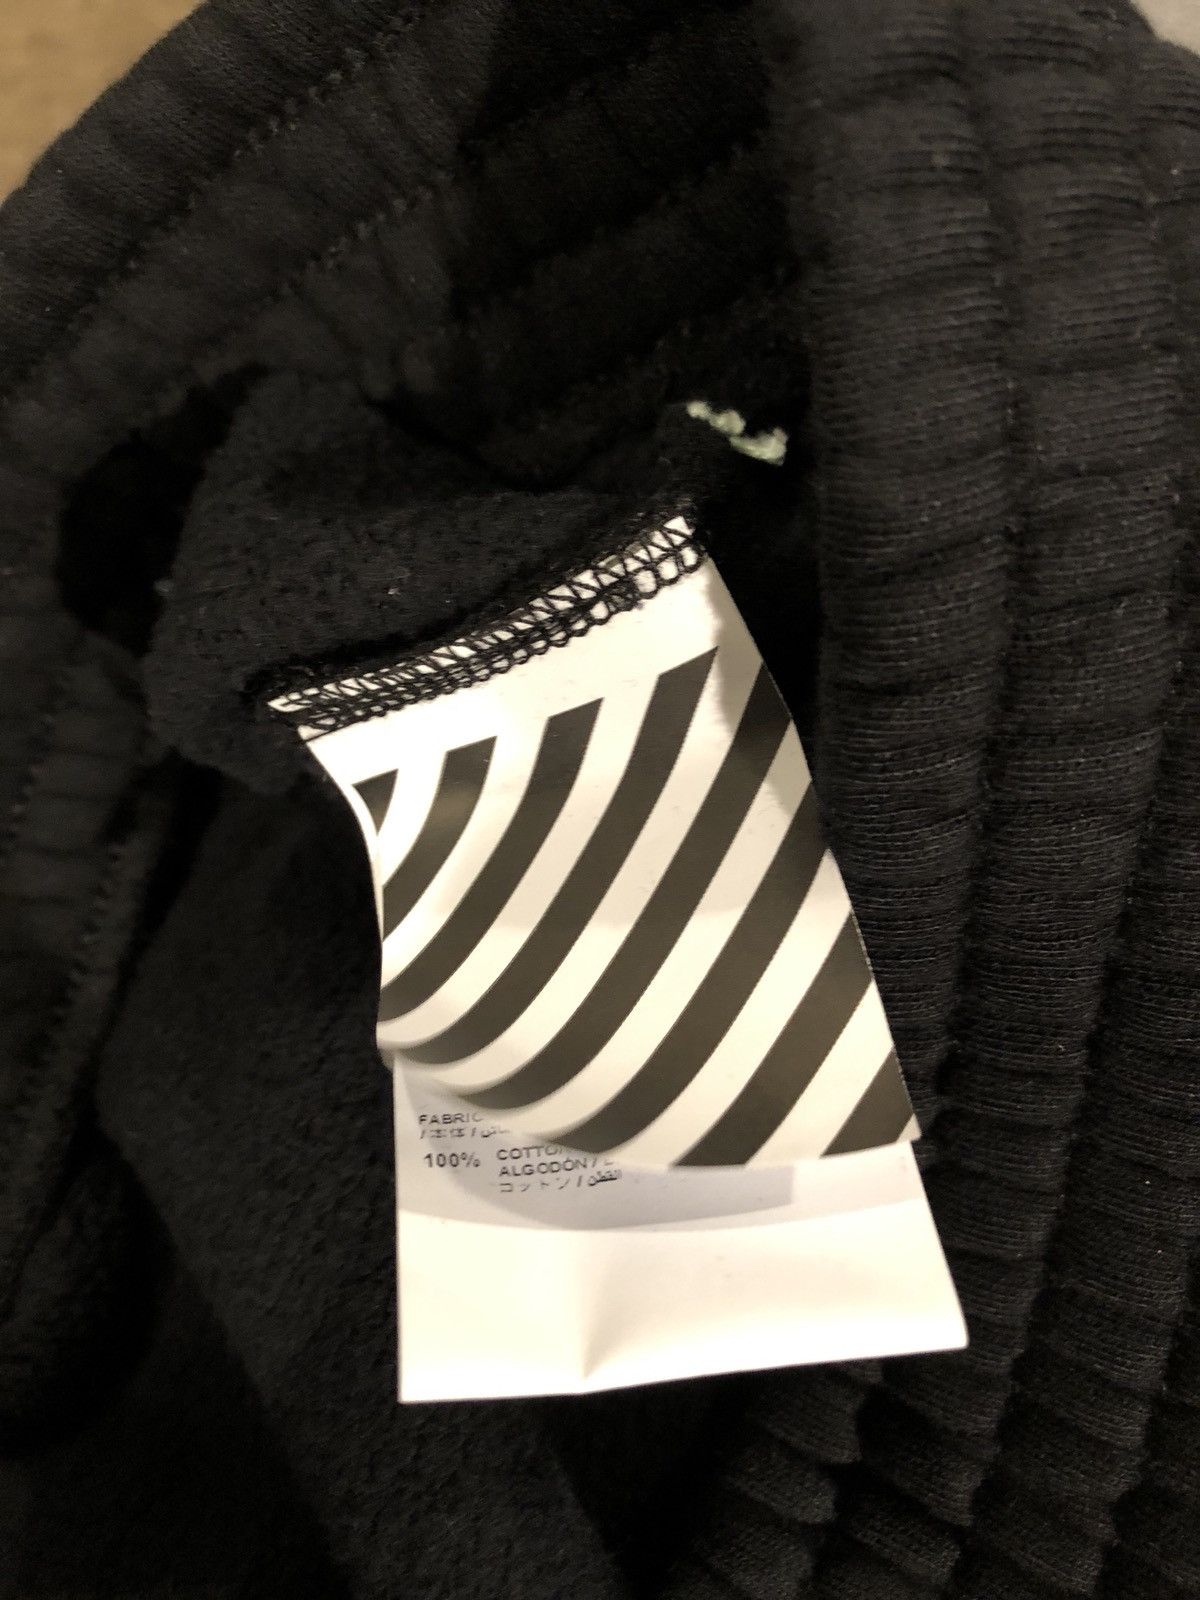 Off-White Seeing Things Birds Hoodie Size US S / EU 44-46 / 1 - 7 Thumbnail